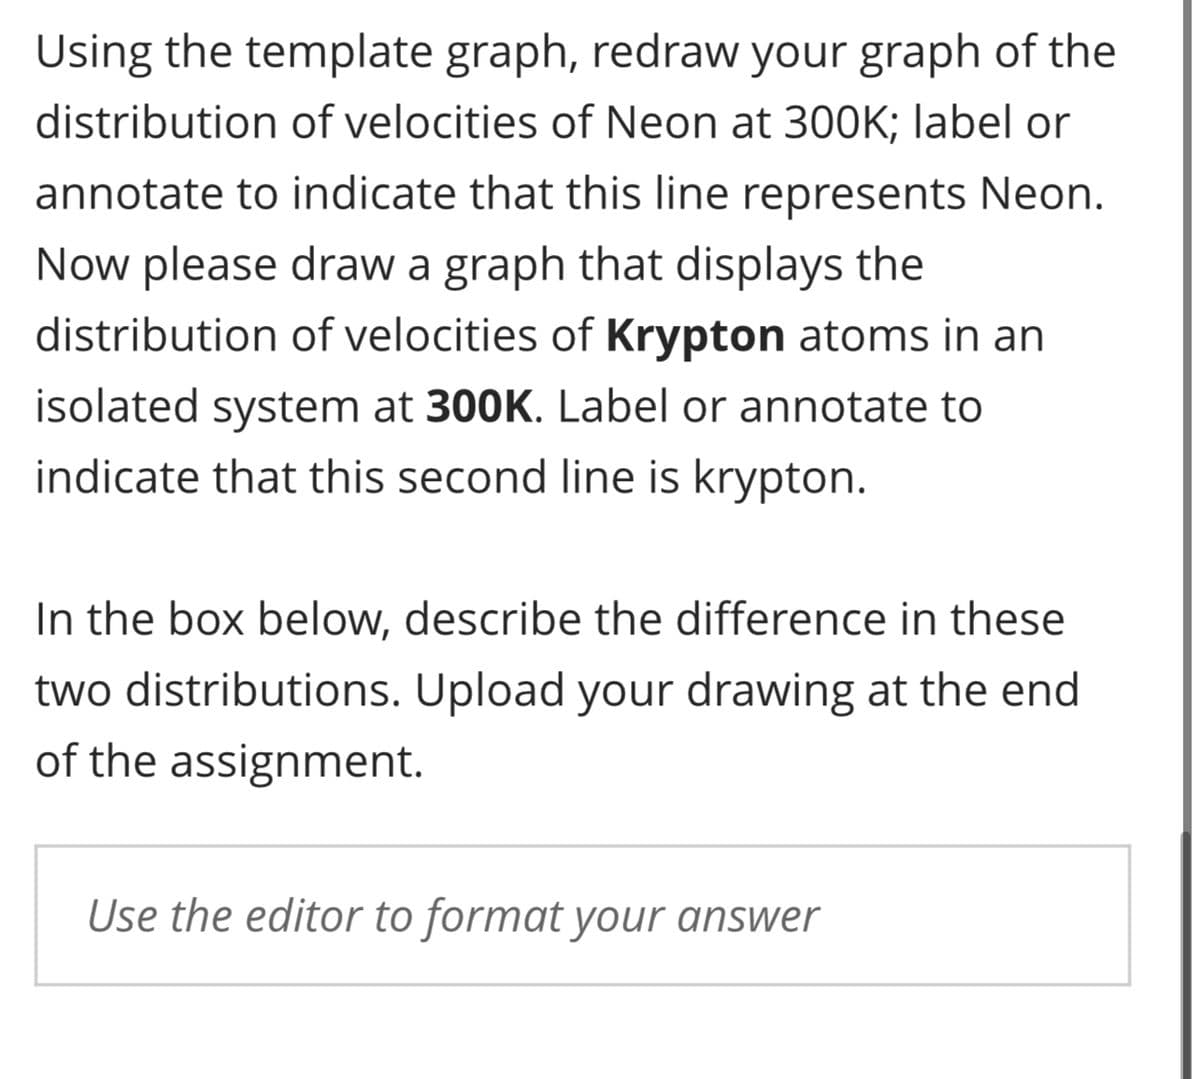 Using the template graph, redraw your graph of the
distribution of velocities of Neon at 300K; label or
annotate to indicate that this line represents Neon.
Now please draw a graph that displays the
distribution of velocities of Krypton atoms in an
isolated system at 300K. Label or annotate to
indicate that this second line is krypton.
In the box below, describe the difference in these
two distributions. Upload your drawing at the end
of the assignment.
Use the editor to format your answer